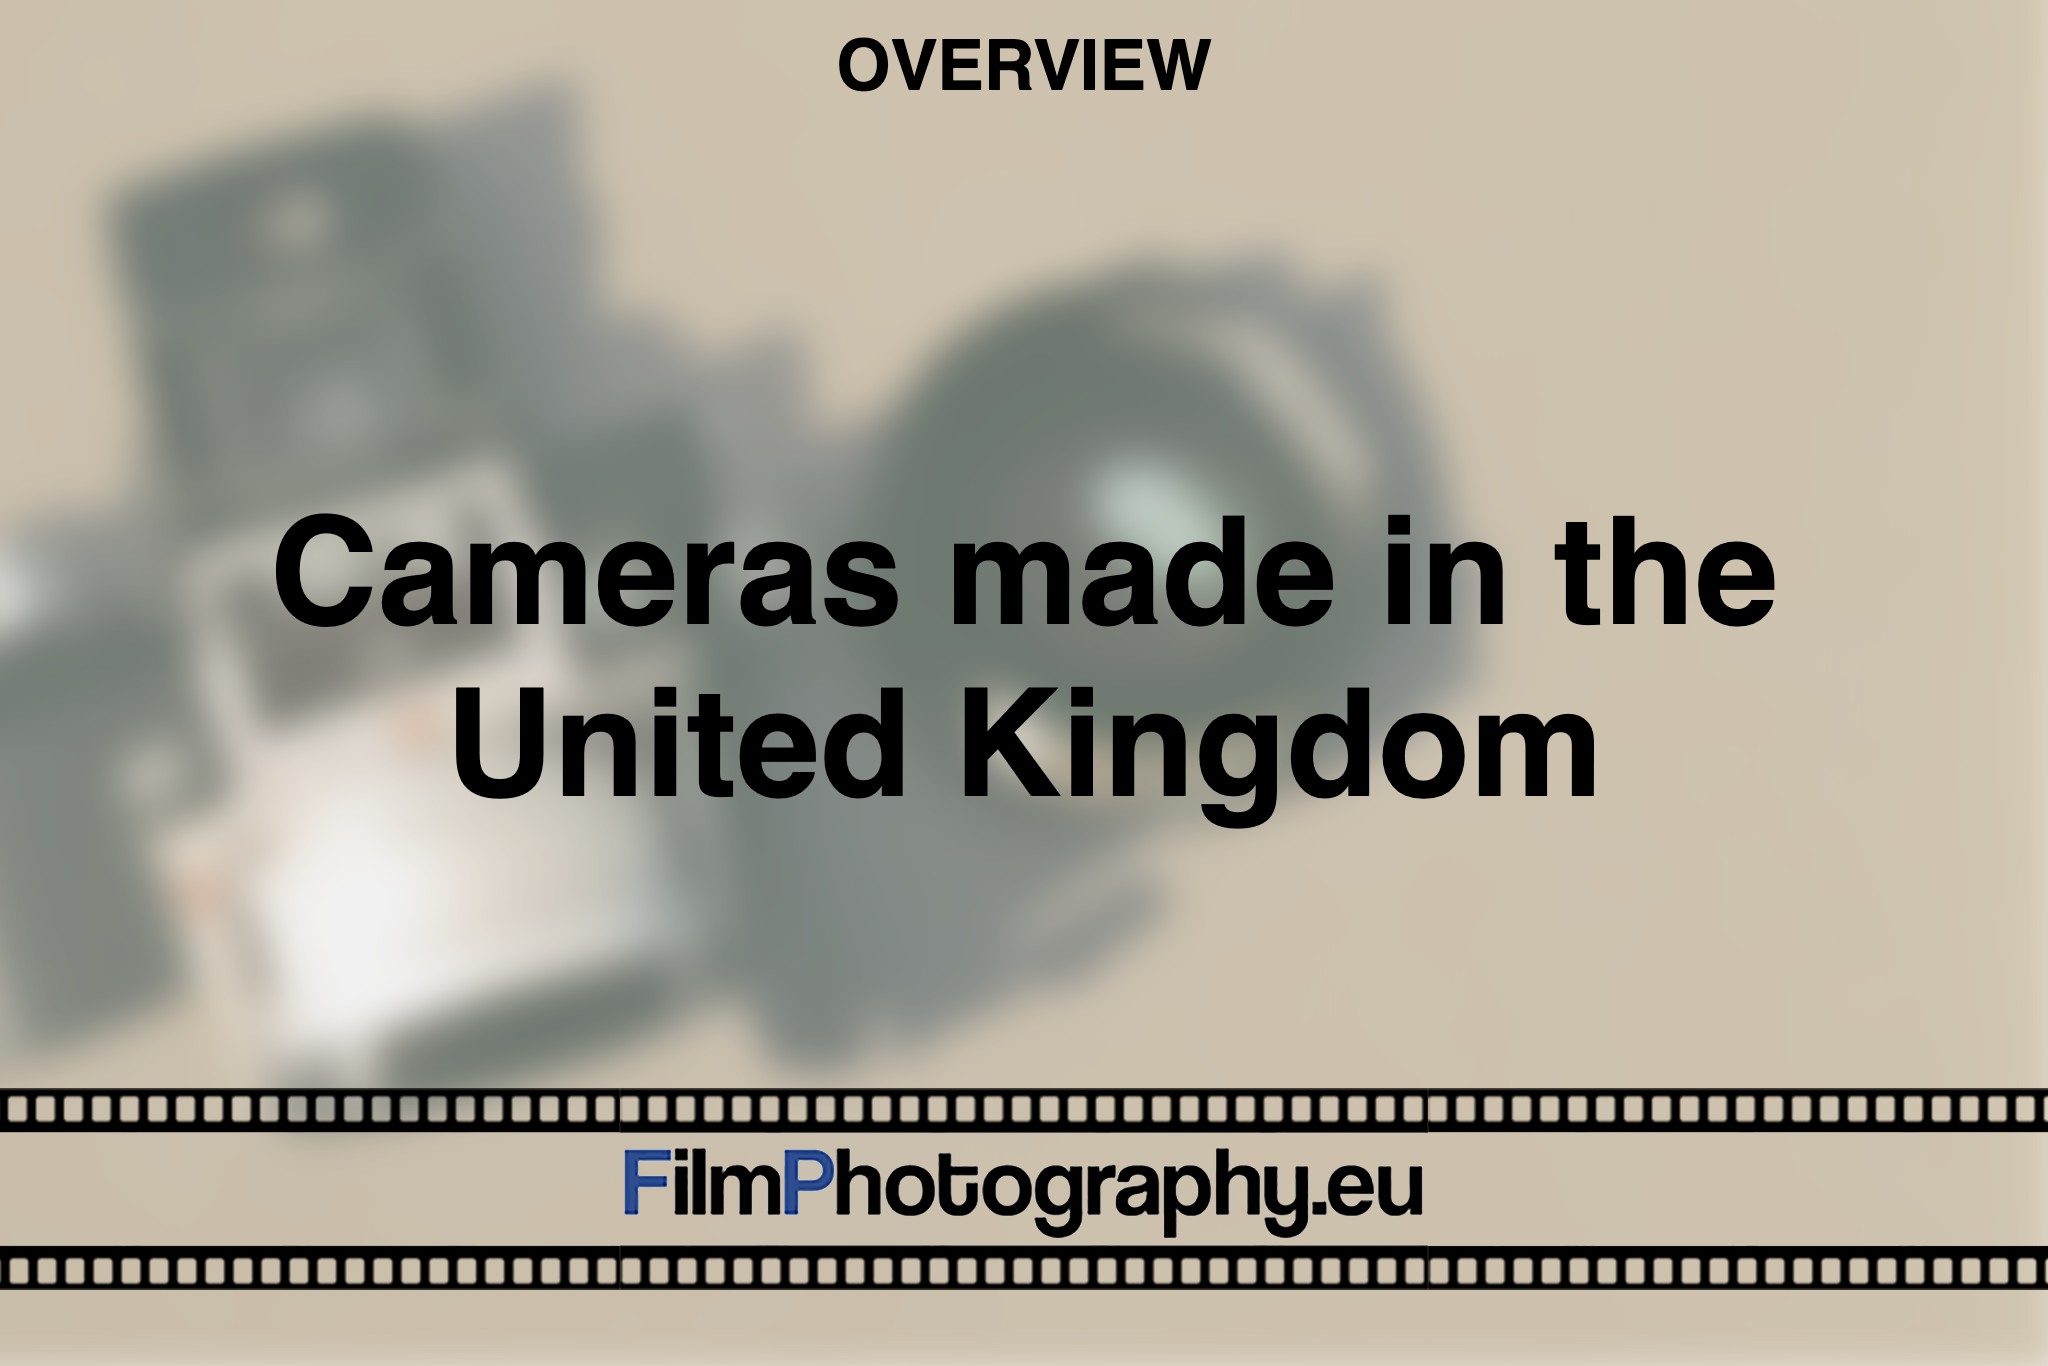 cameras-made-in-united-kingdom-production-factory-photo-bnv